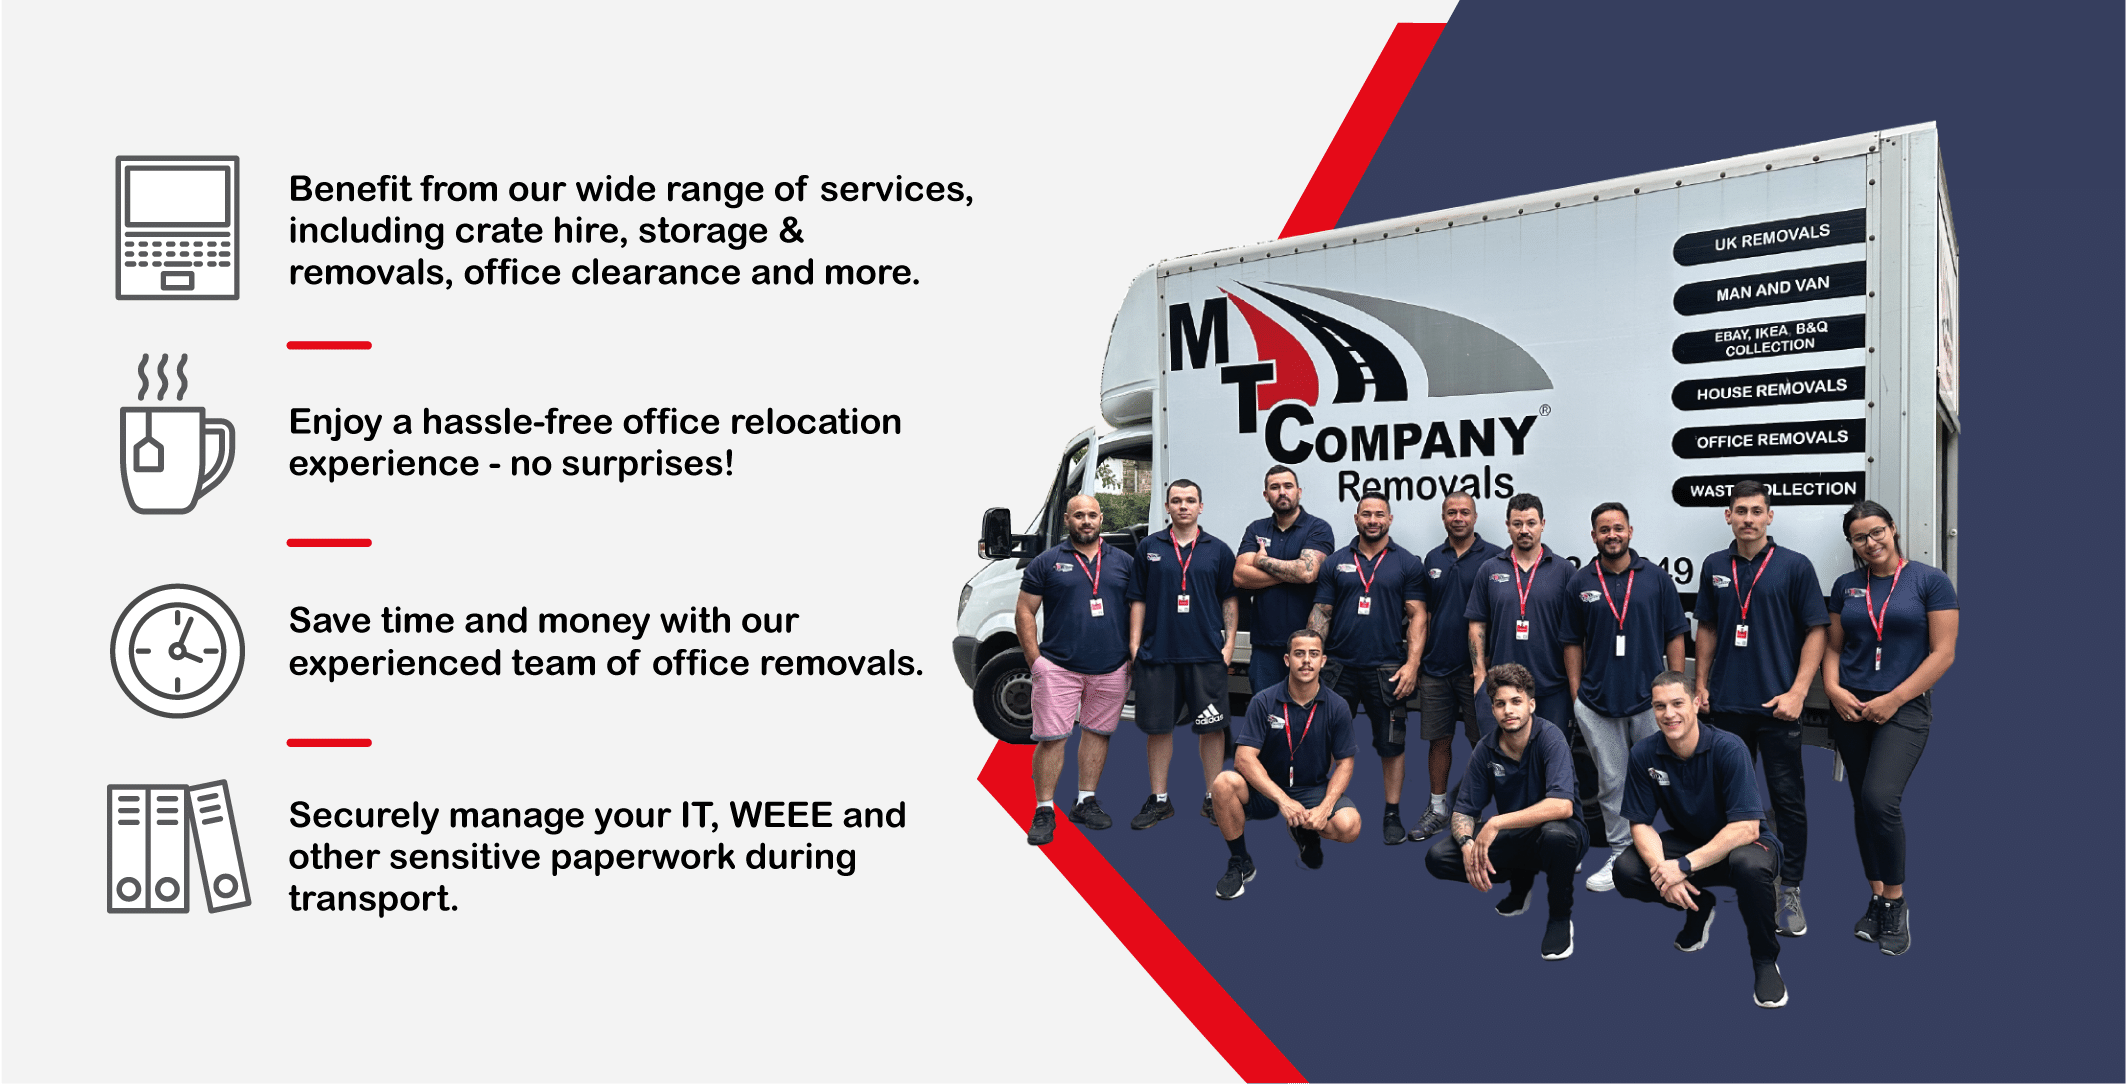 Moving offices can be a stressful experience. With MTC Office Relocations London, you no longer have to worry. Our experienced team offers quality office relocations and removals services throughout London and the UK.